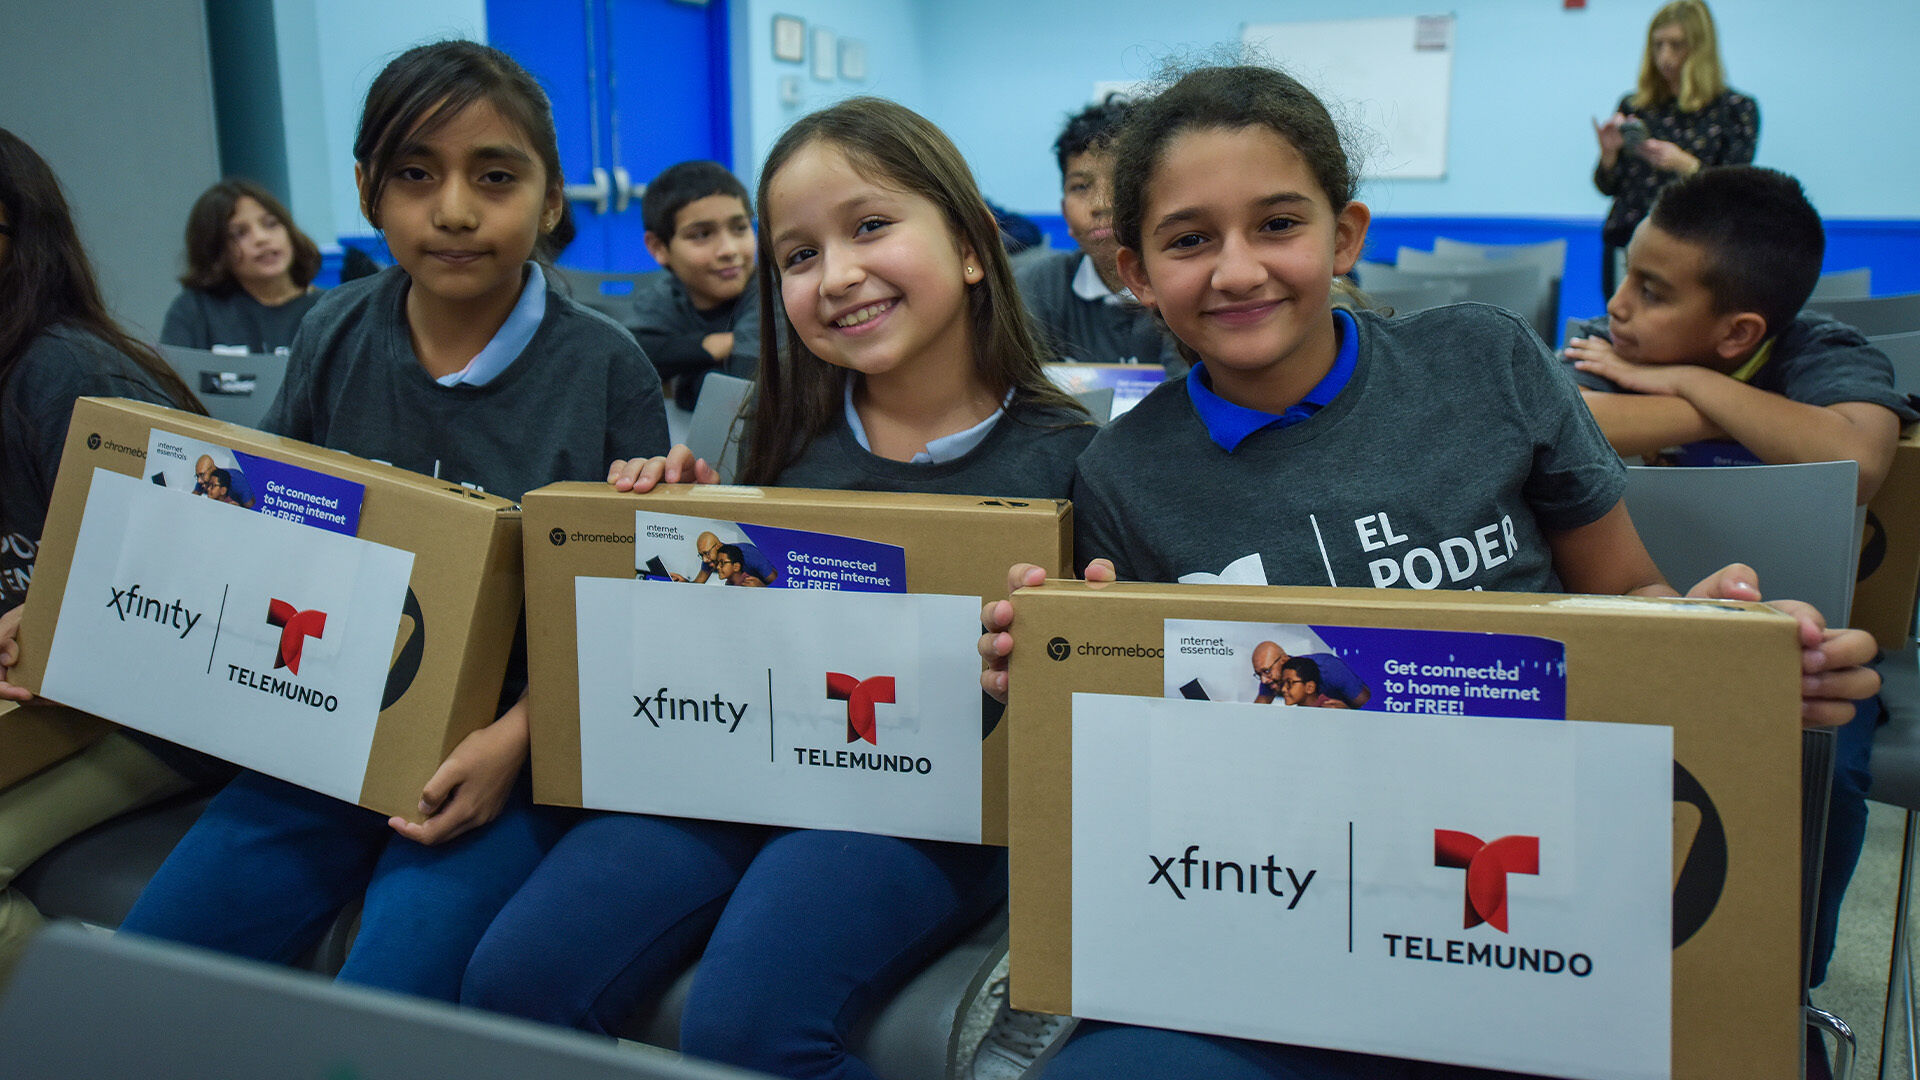 This yearly initiative between Telemundo, Comcast, and the Hispanic Heritage Foundation is an integral component of Project UP. Backed by a $1 billion commitment to reach tens of millions of people, P